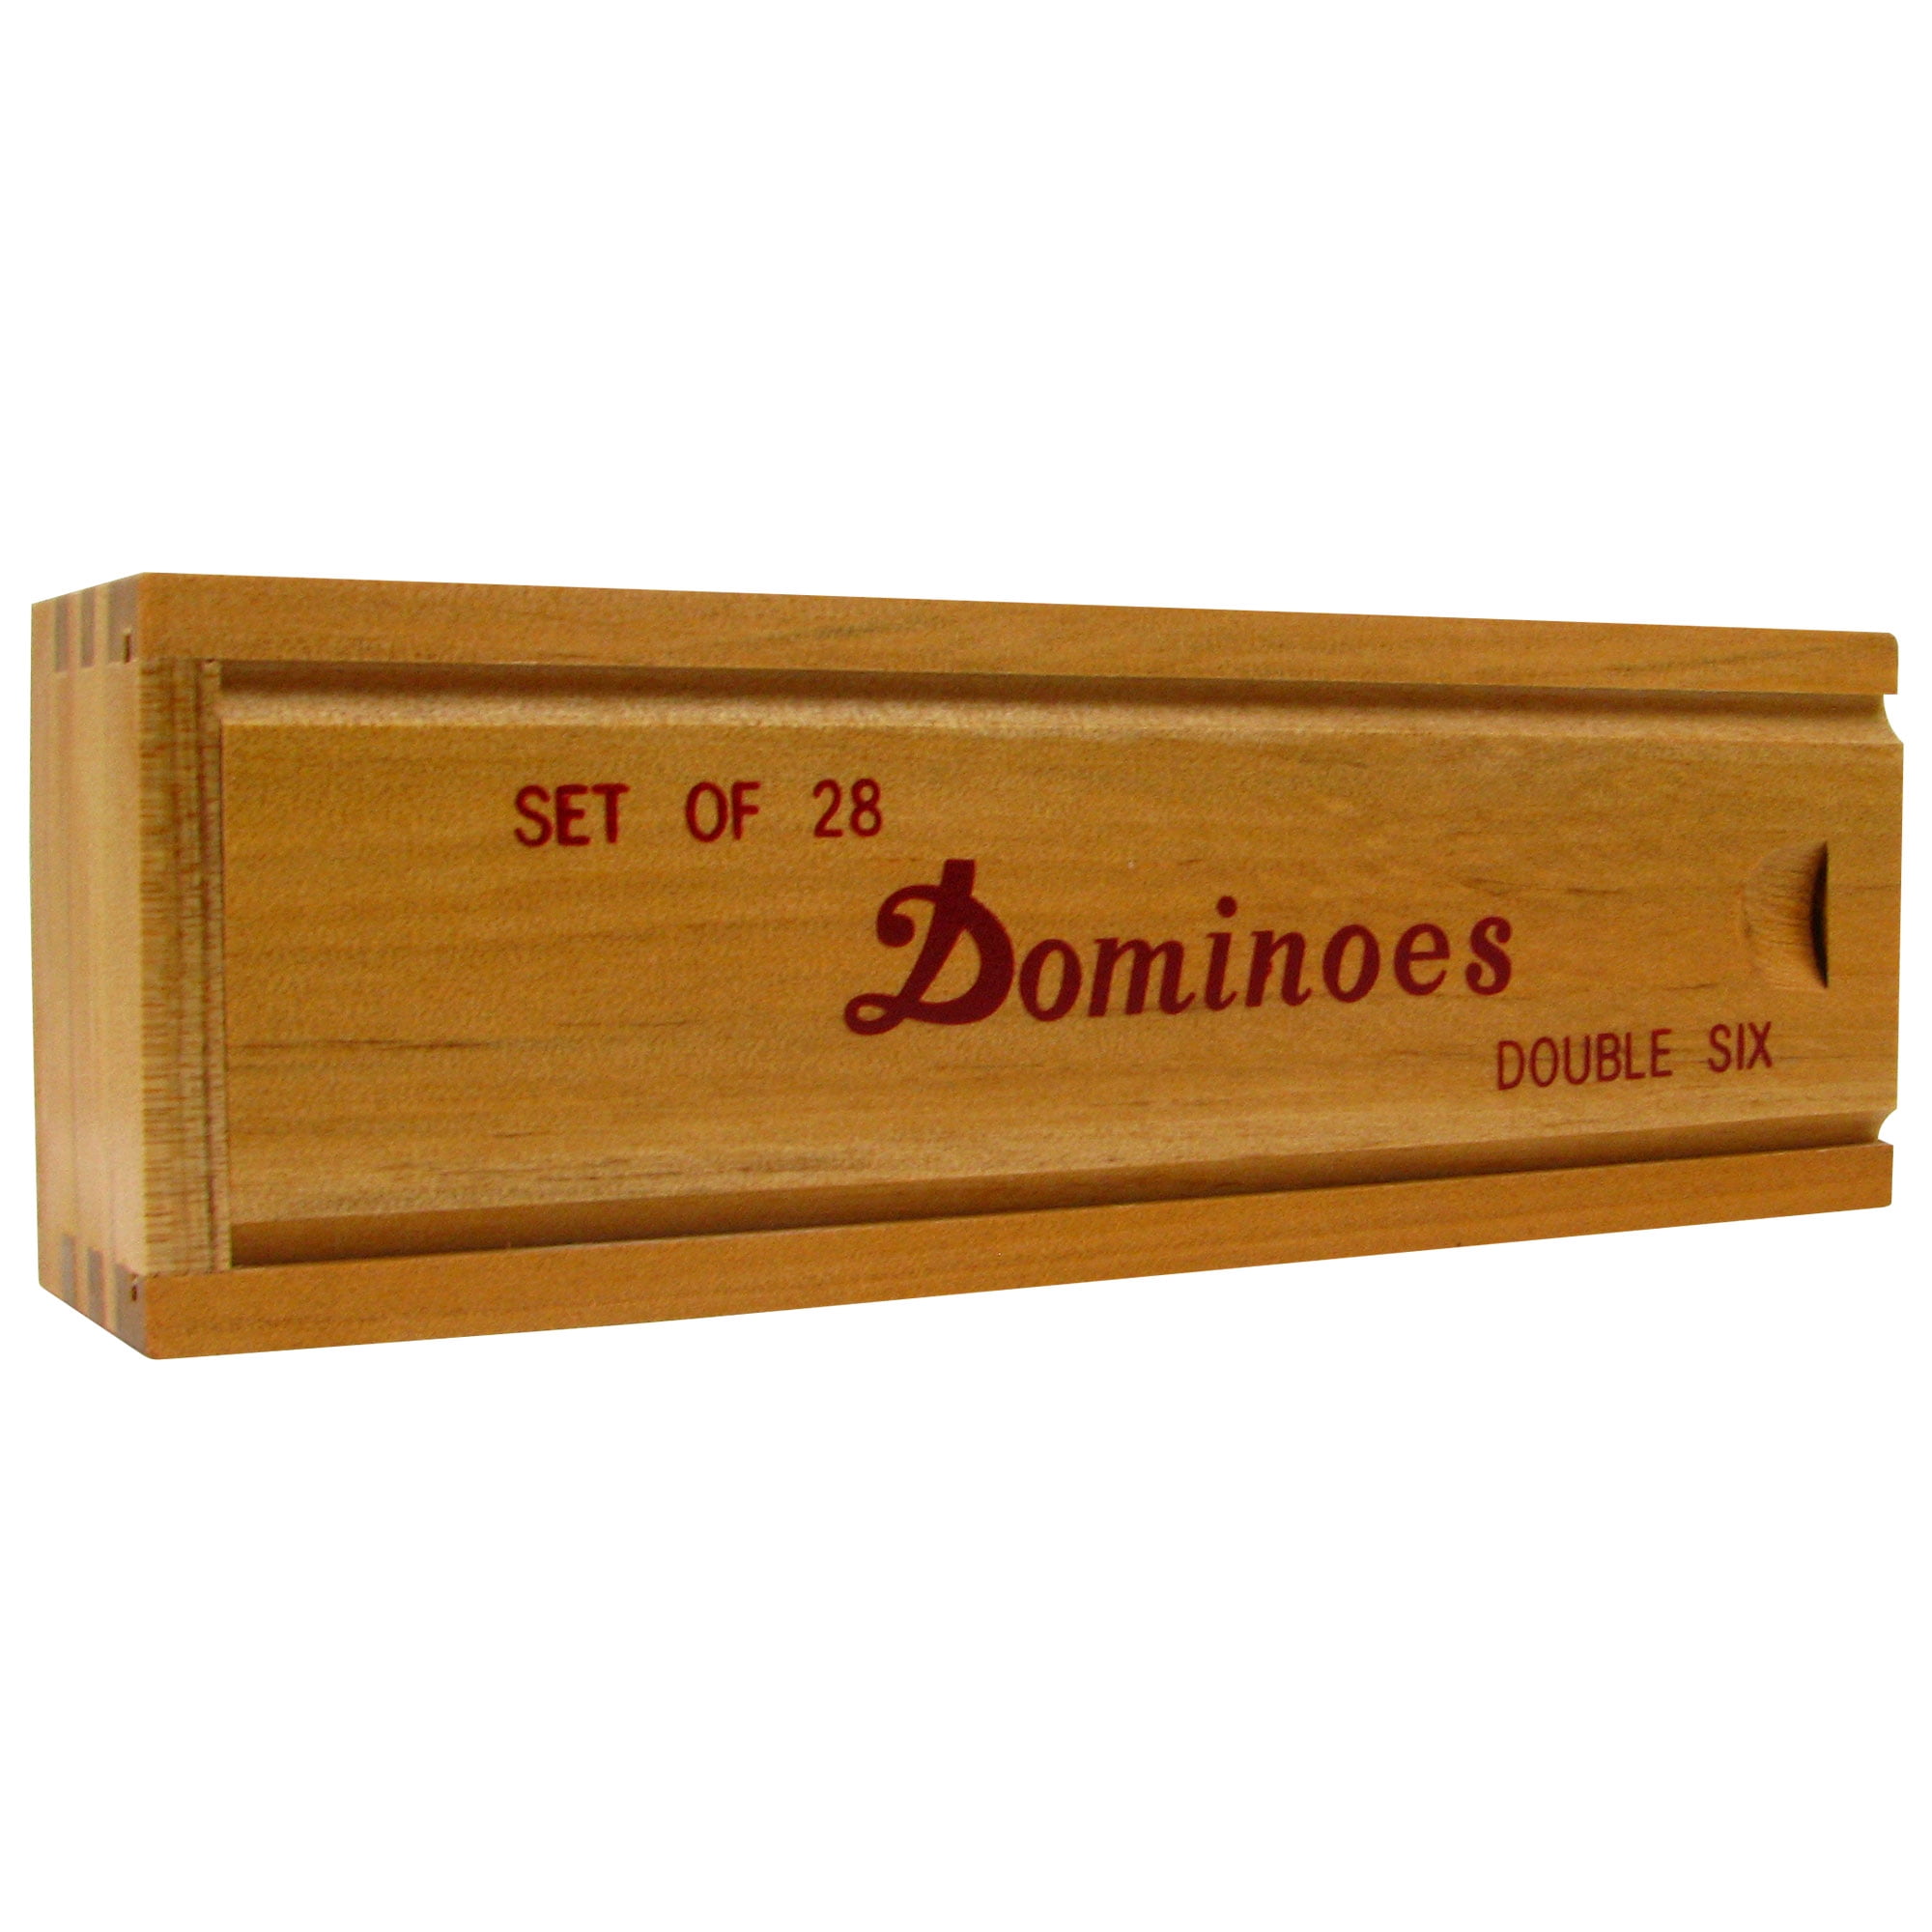 Details about   DOMINOES DOUBLE SIX LEATHERETTE CASE 28 PC DOMINO GAME 